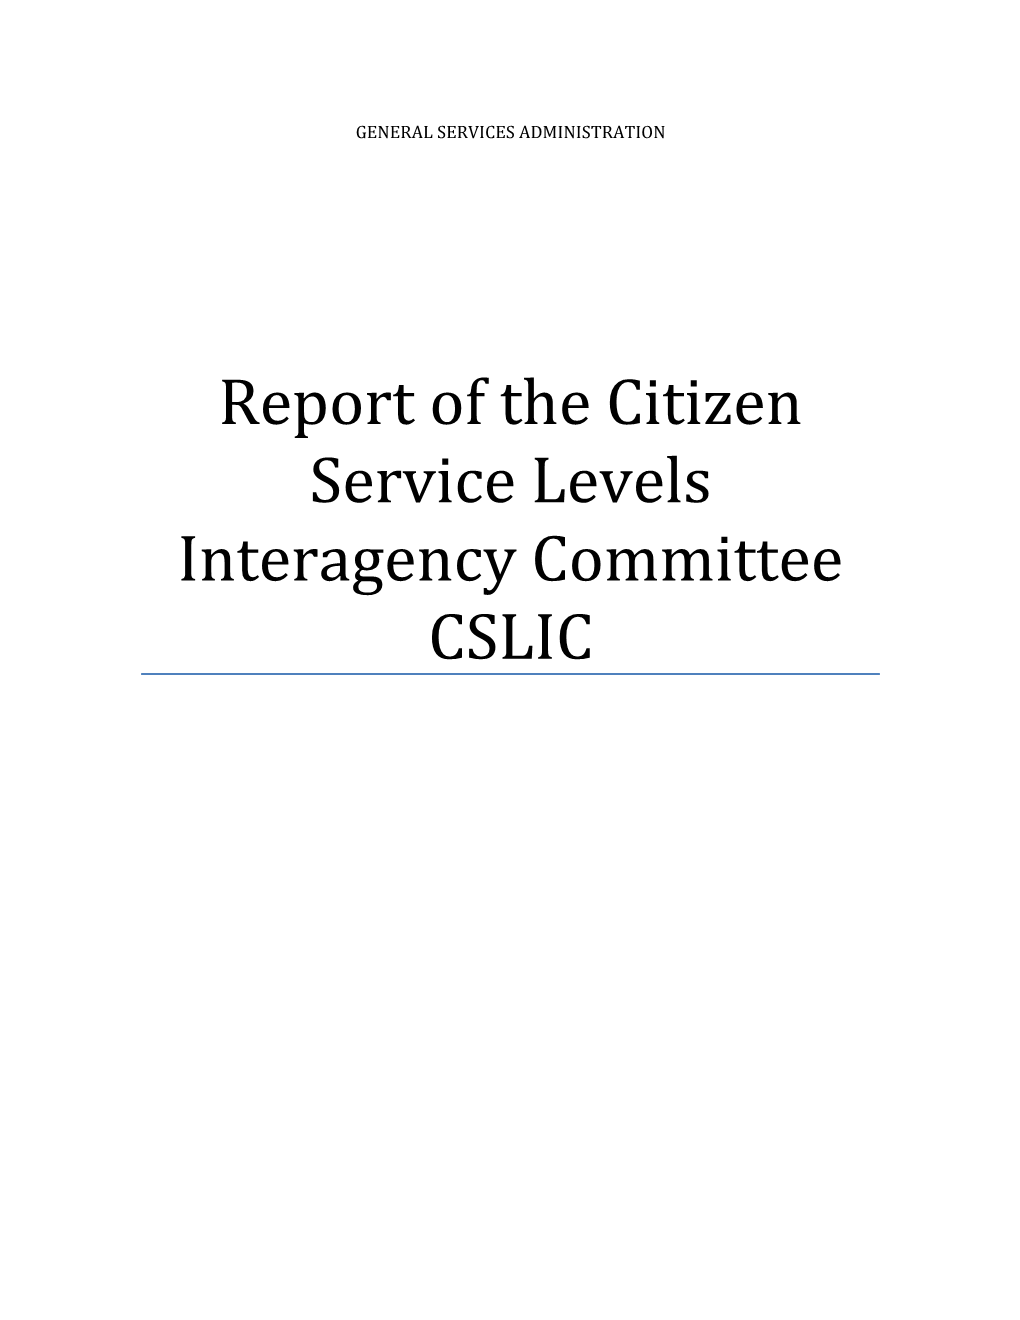 Report of the Citizen Service Levels Interagency Committee CSLIC